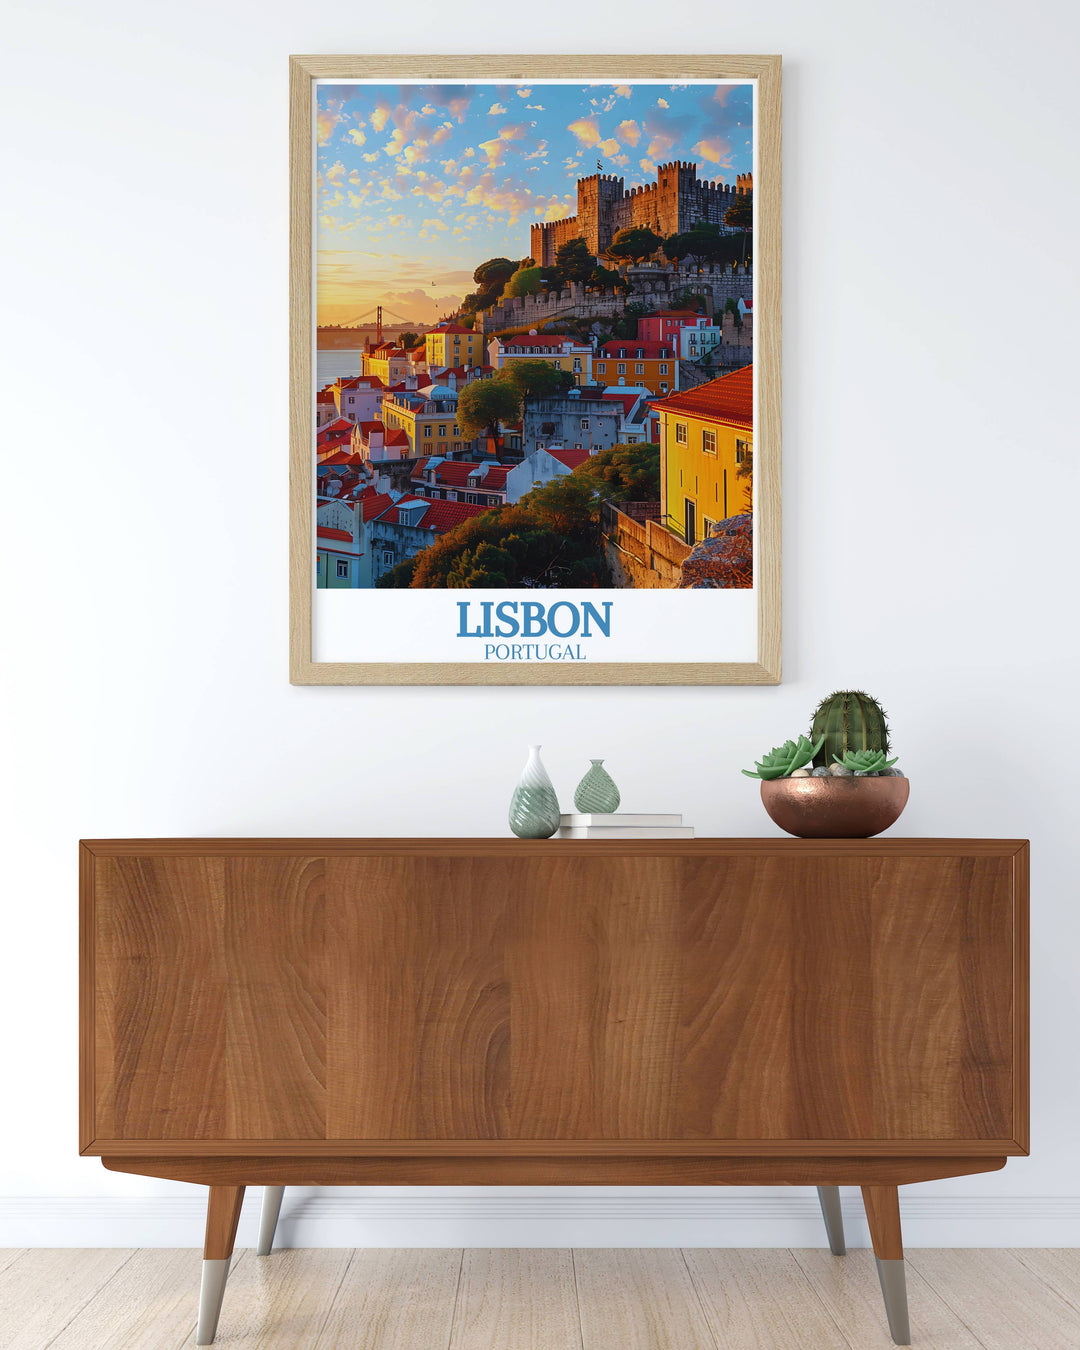 Add a touch of elegance to your space with our Lisbon poster of Sao Jorge Castle. This captivating print brings the beauty and historical importance of this iconic Portuguese landmark into your home.